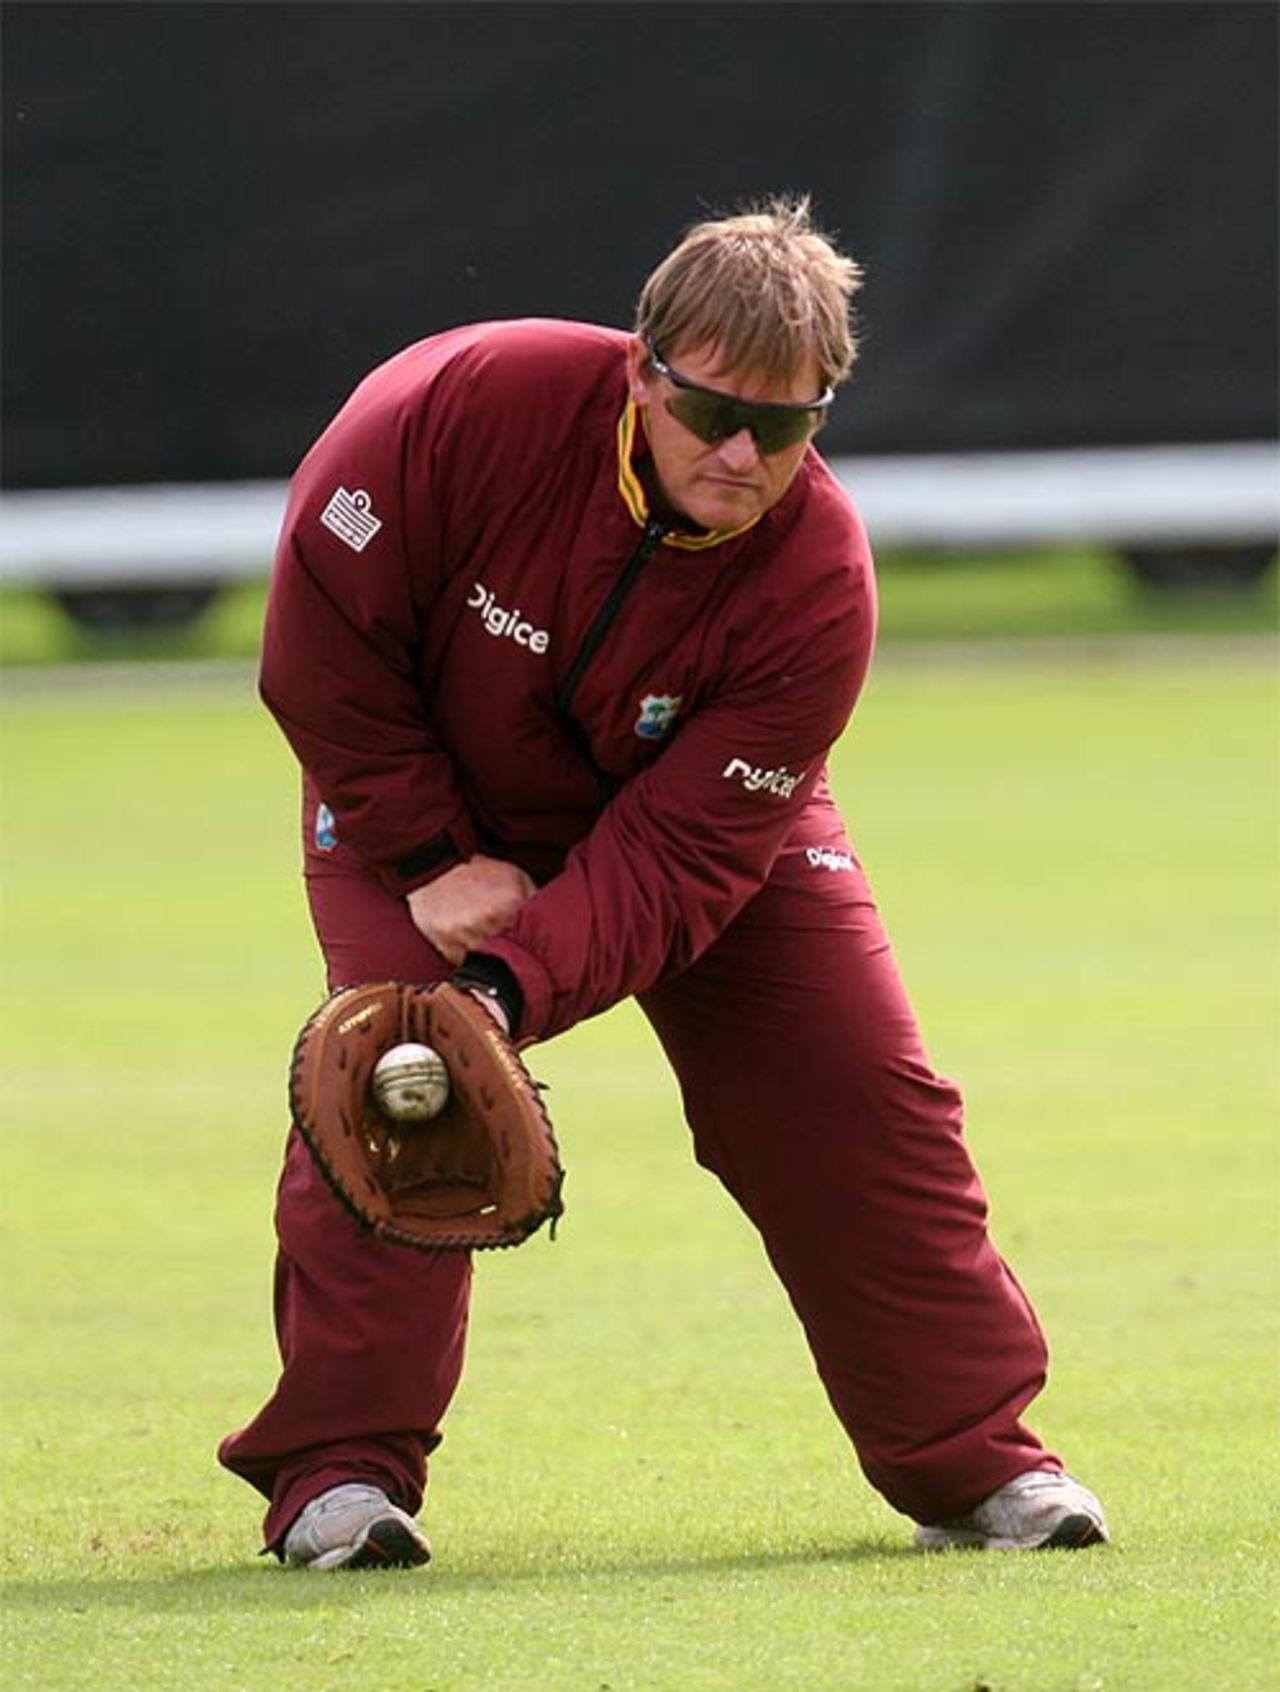 David Moore indulges in fielding practice before the start of West Indies's quadrangular series match against Scotland, Clontarf, July 12, 2007